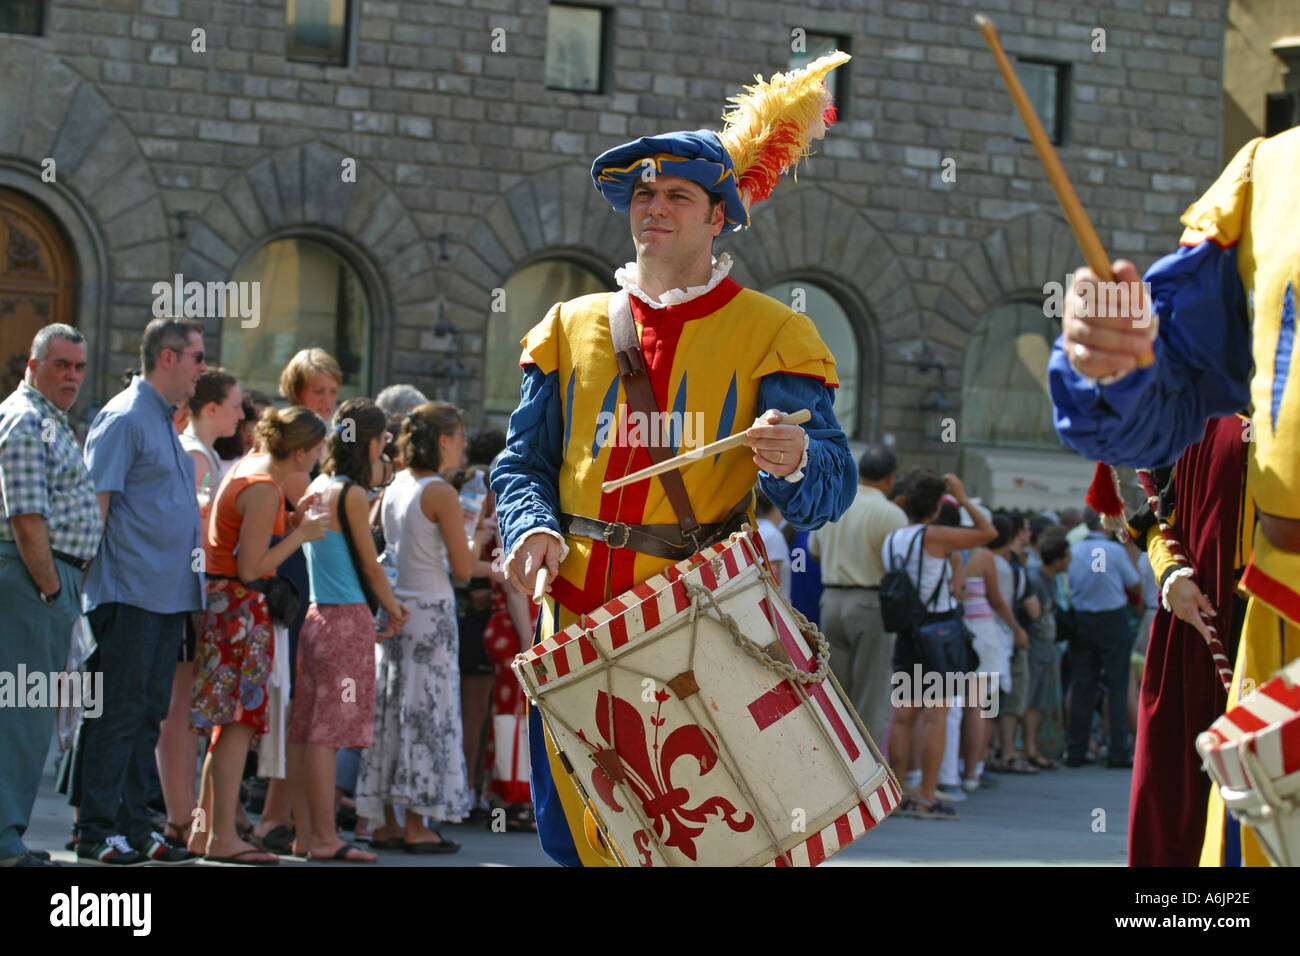 The Costume football game procession Florence Italy Stock Photo